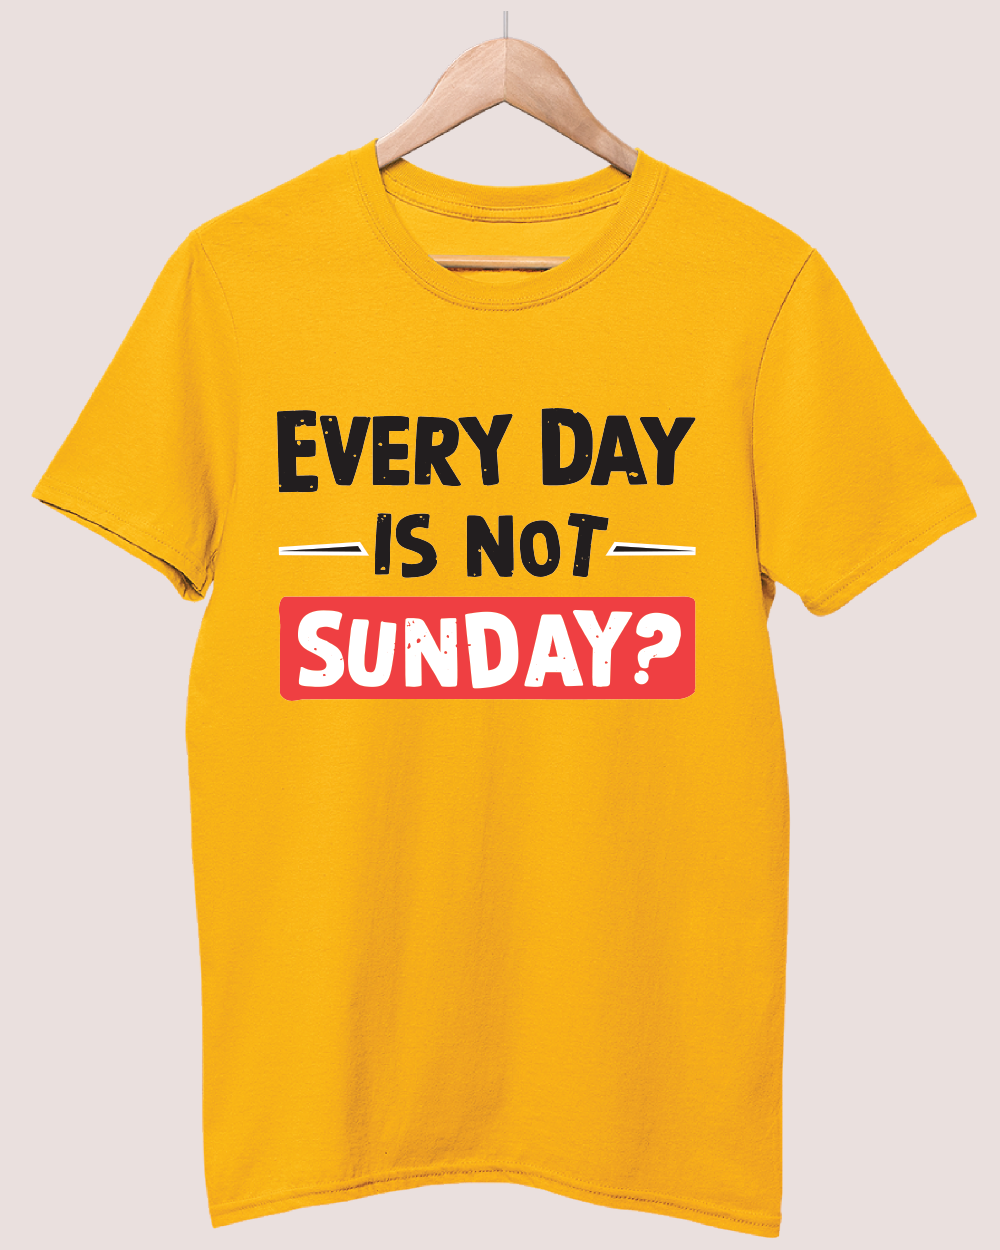 Everyday is not sunday T-shirt